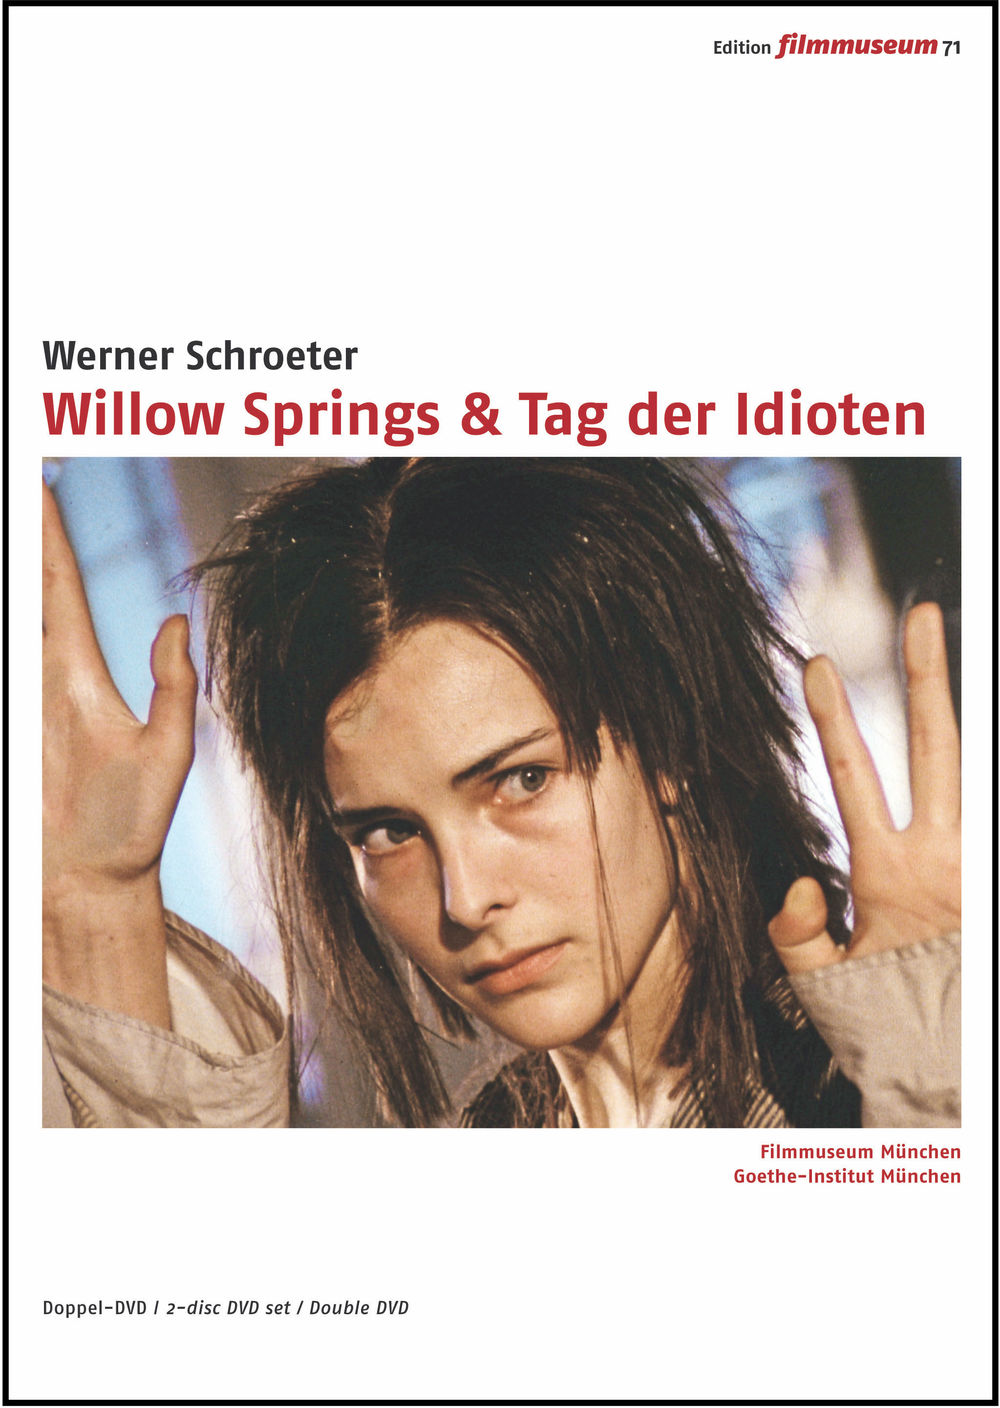 Willow+Springs+Tag+der+Idioten+cover-4.jpg